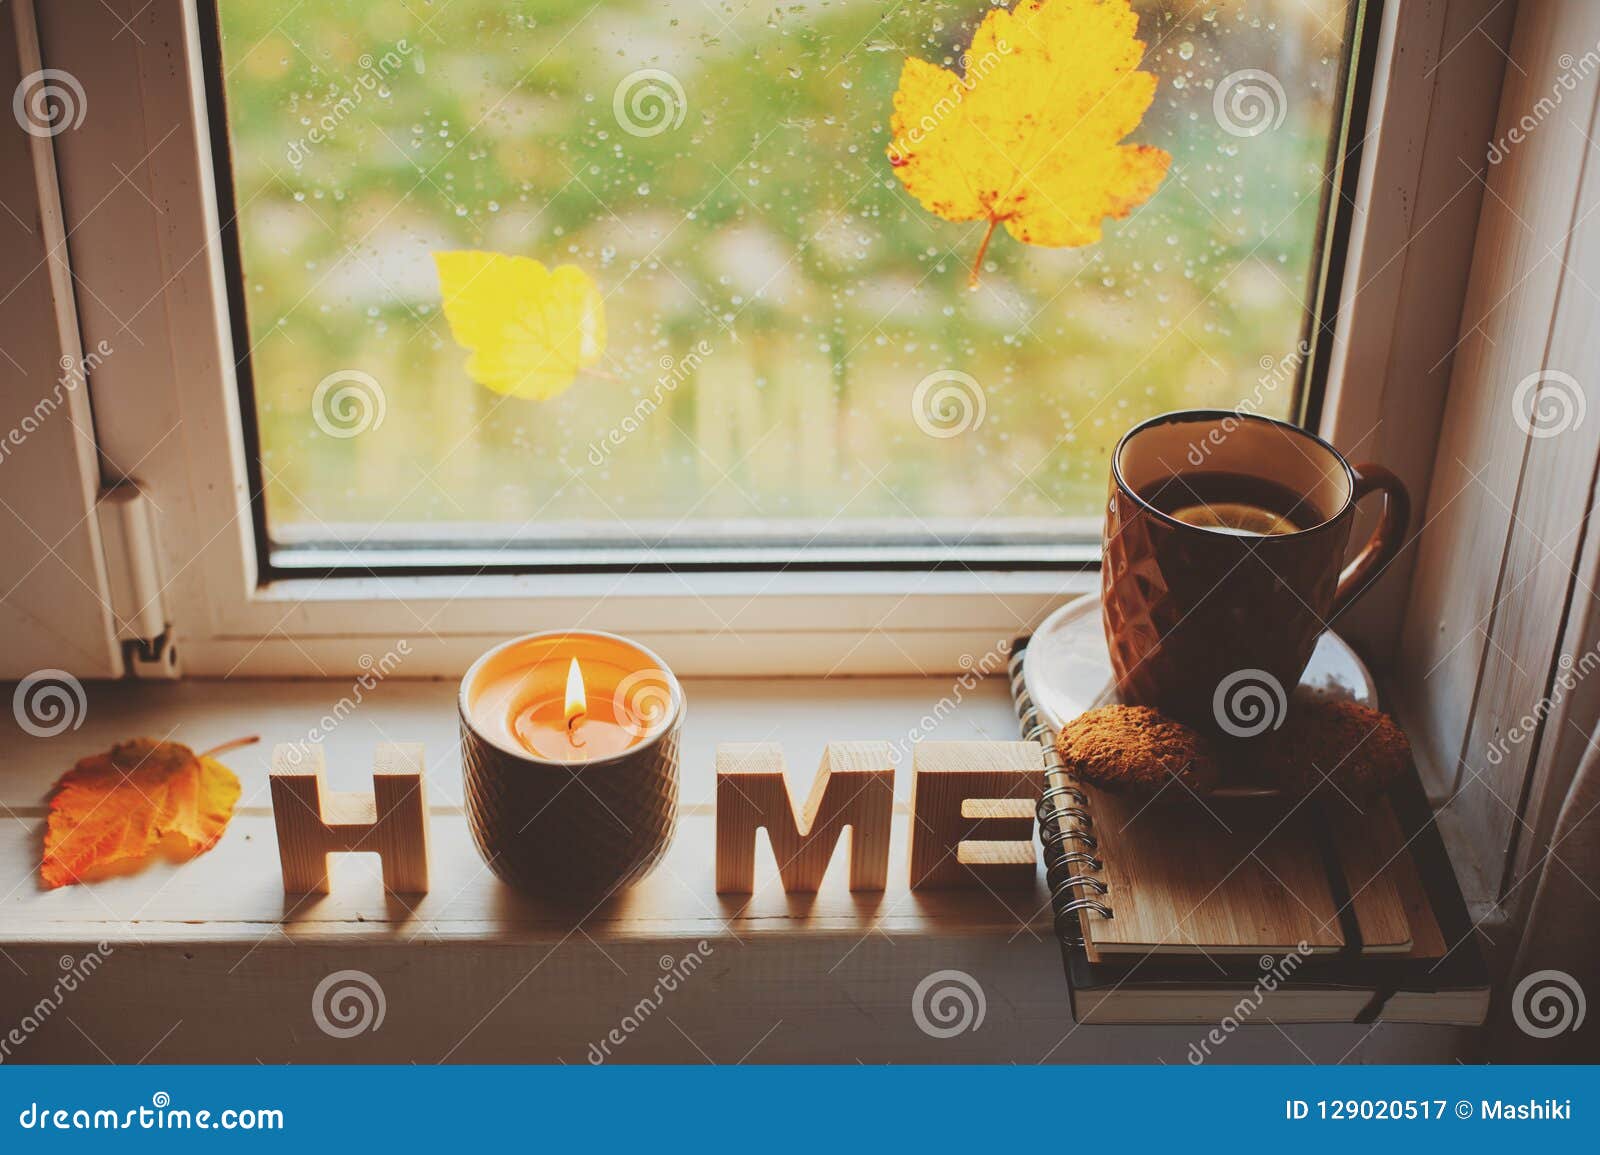 Premium Photo  Hot tea and a thermos on the table in the fall